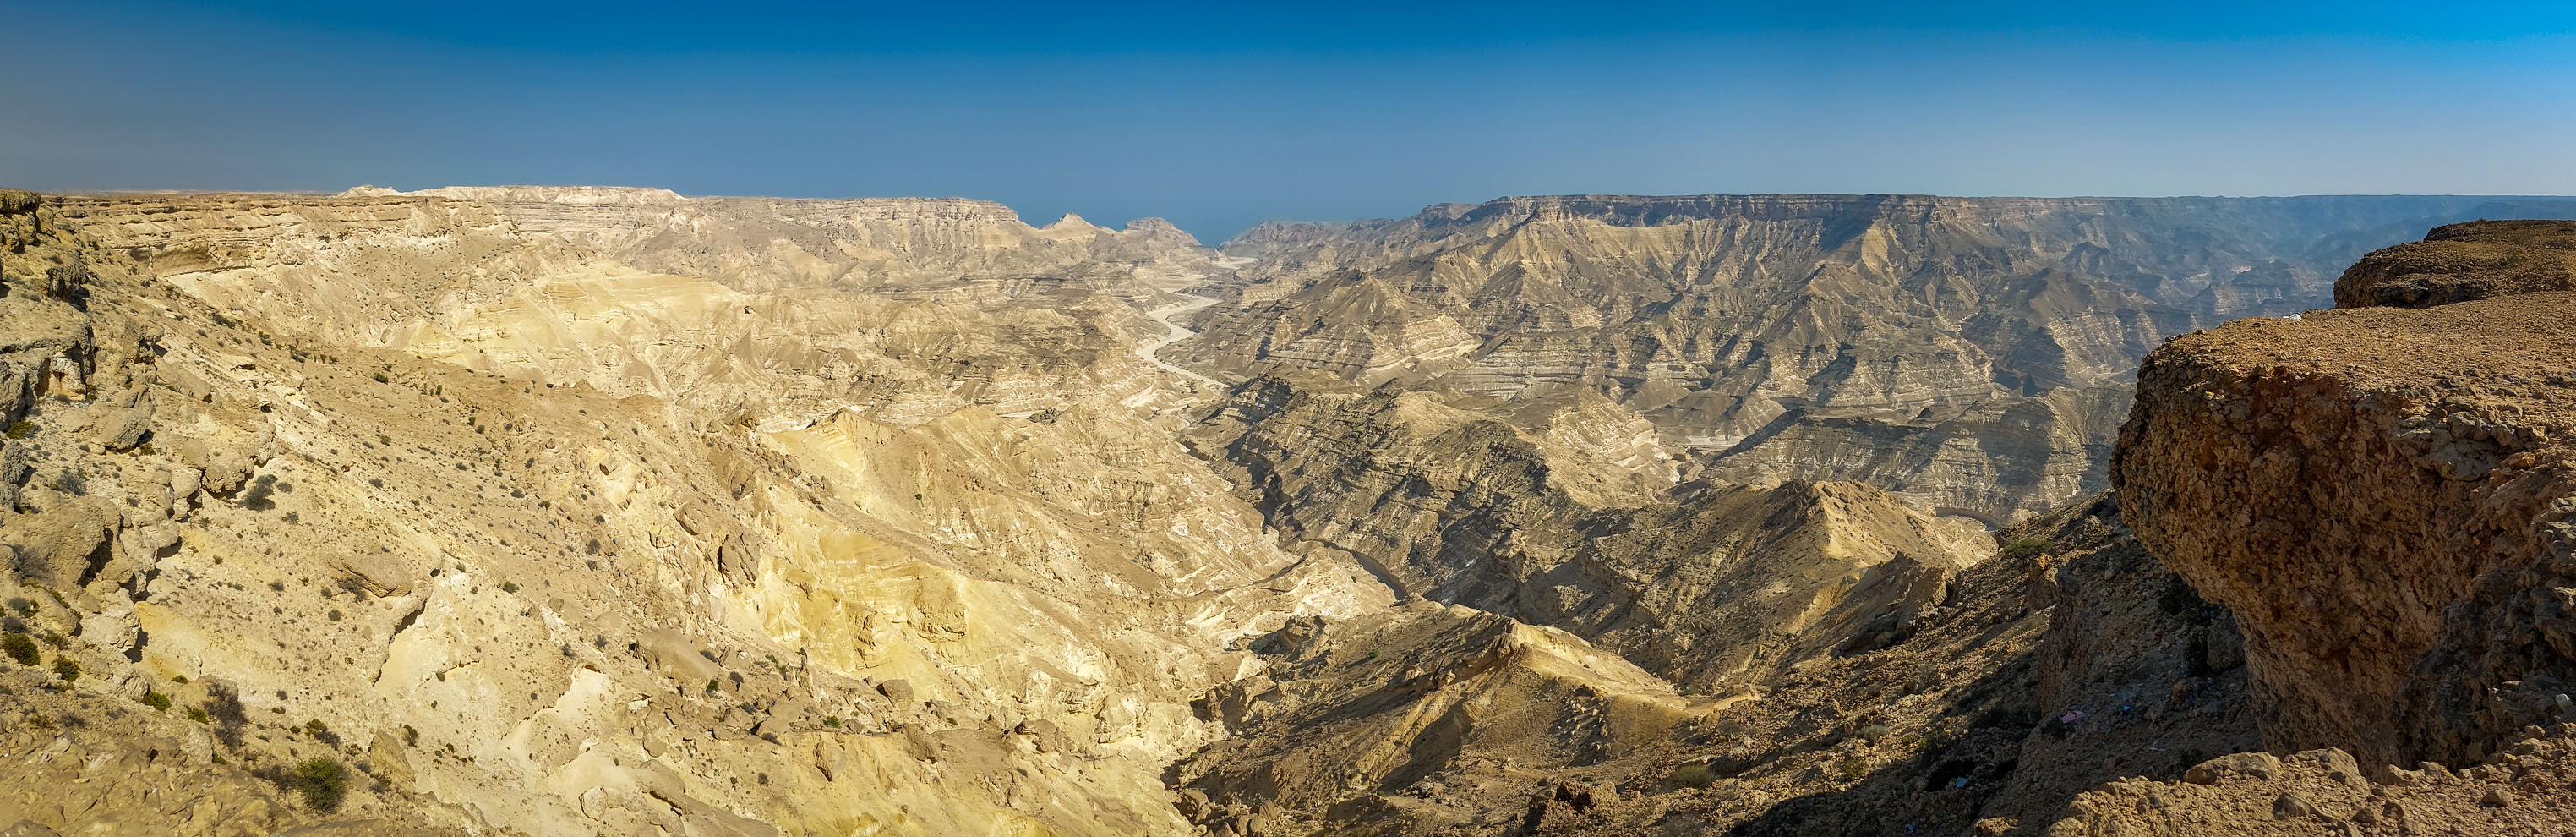 <span  class="uc_style_uc_tiles_grid_image_elementor_uc_items_attribute_title" style="color:#ffffff;">wonderfull mountain scenery of Oman</span>